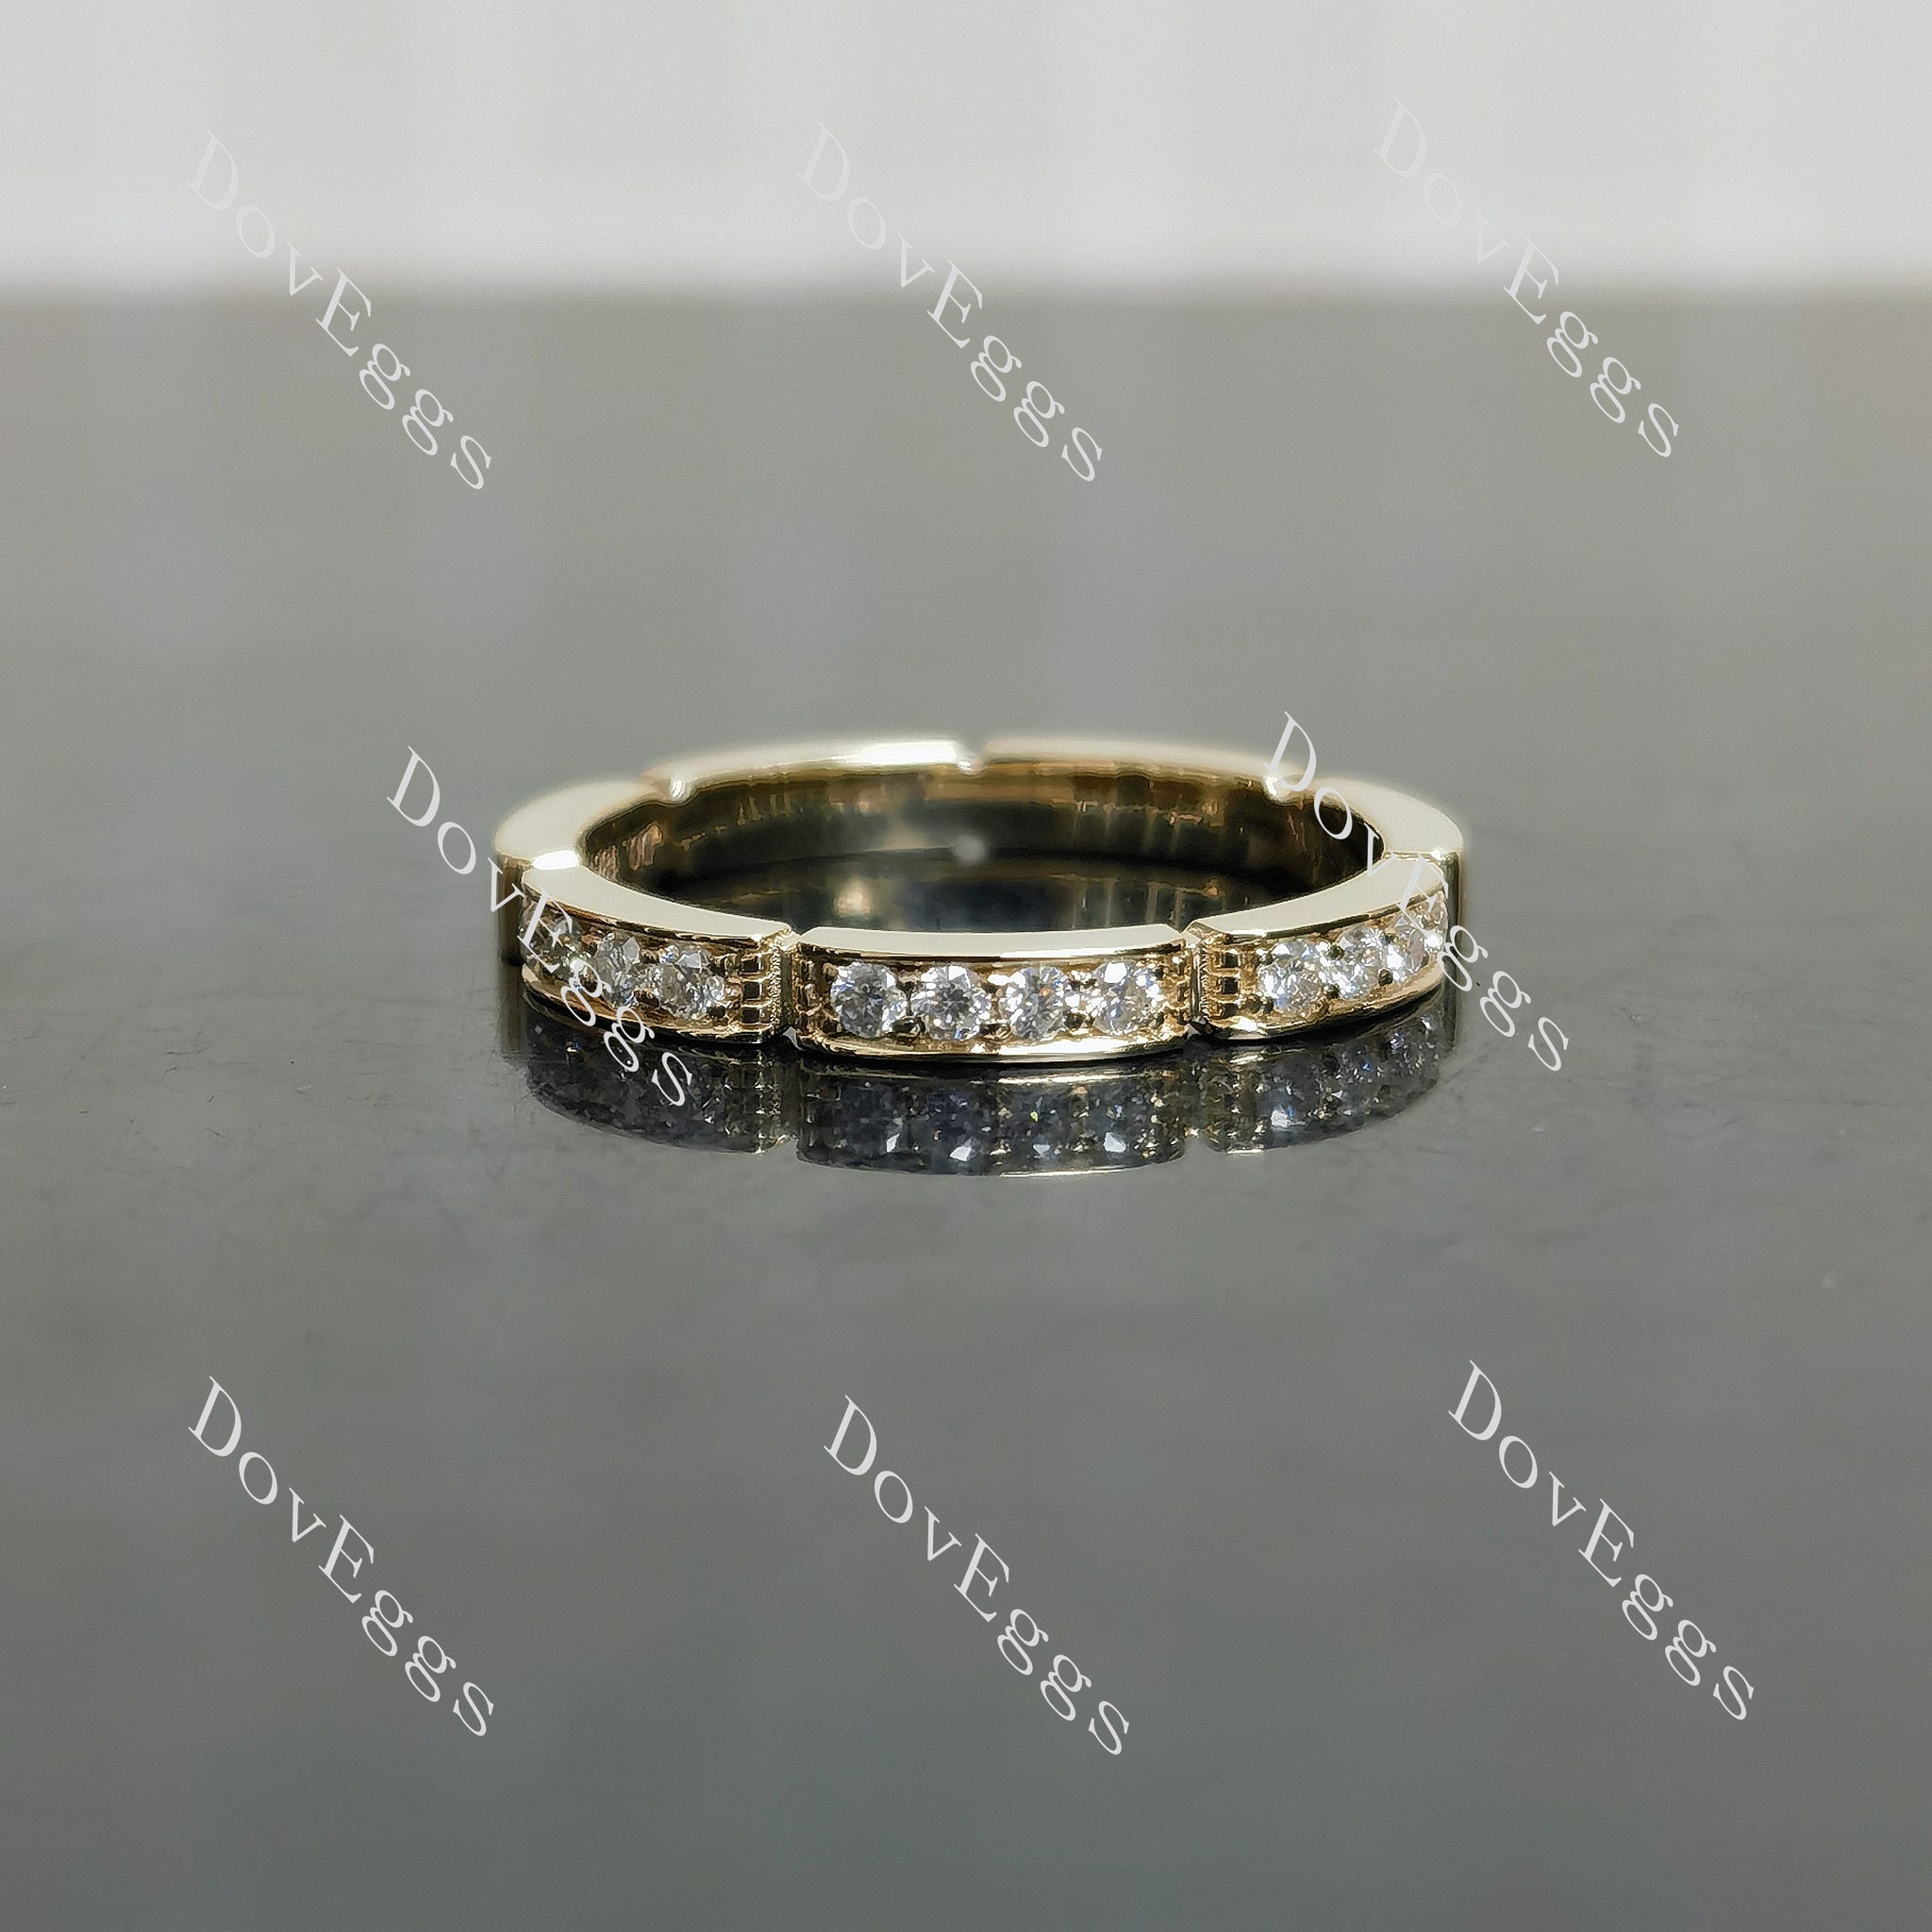 Doveggs round floral moissanite wedding band-2.1mm band width